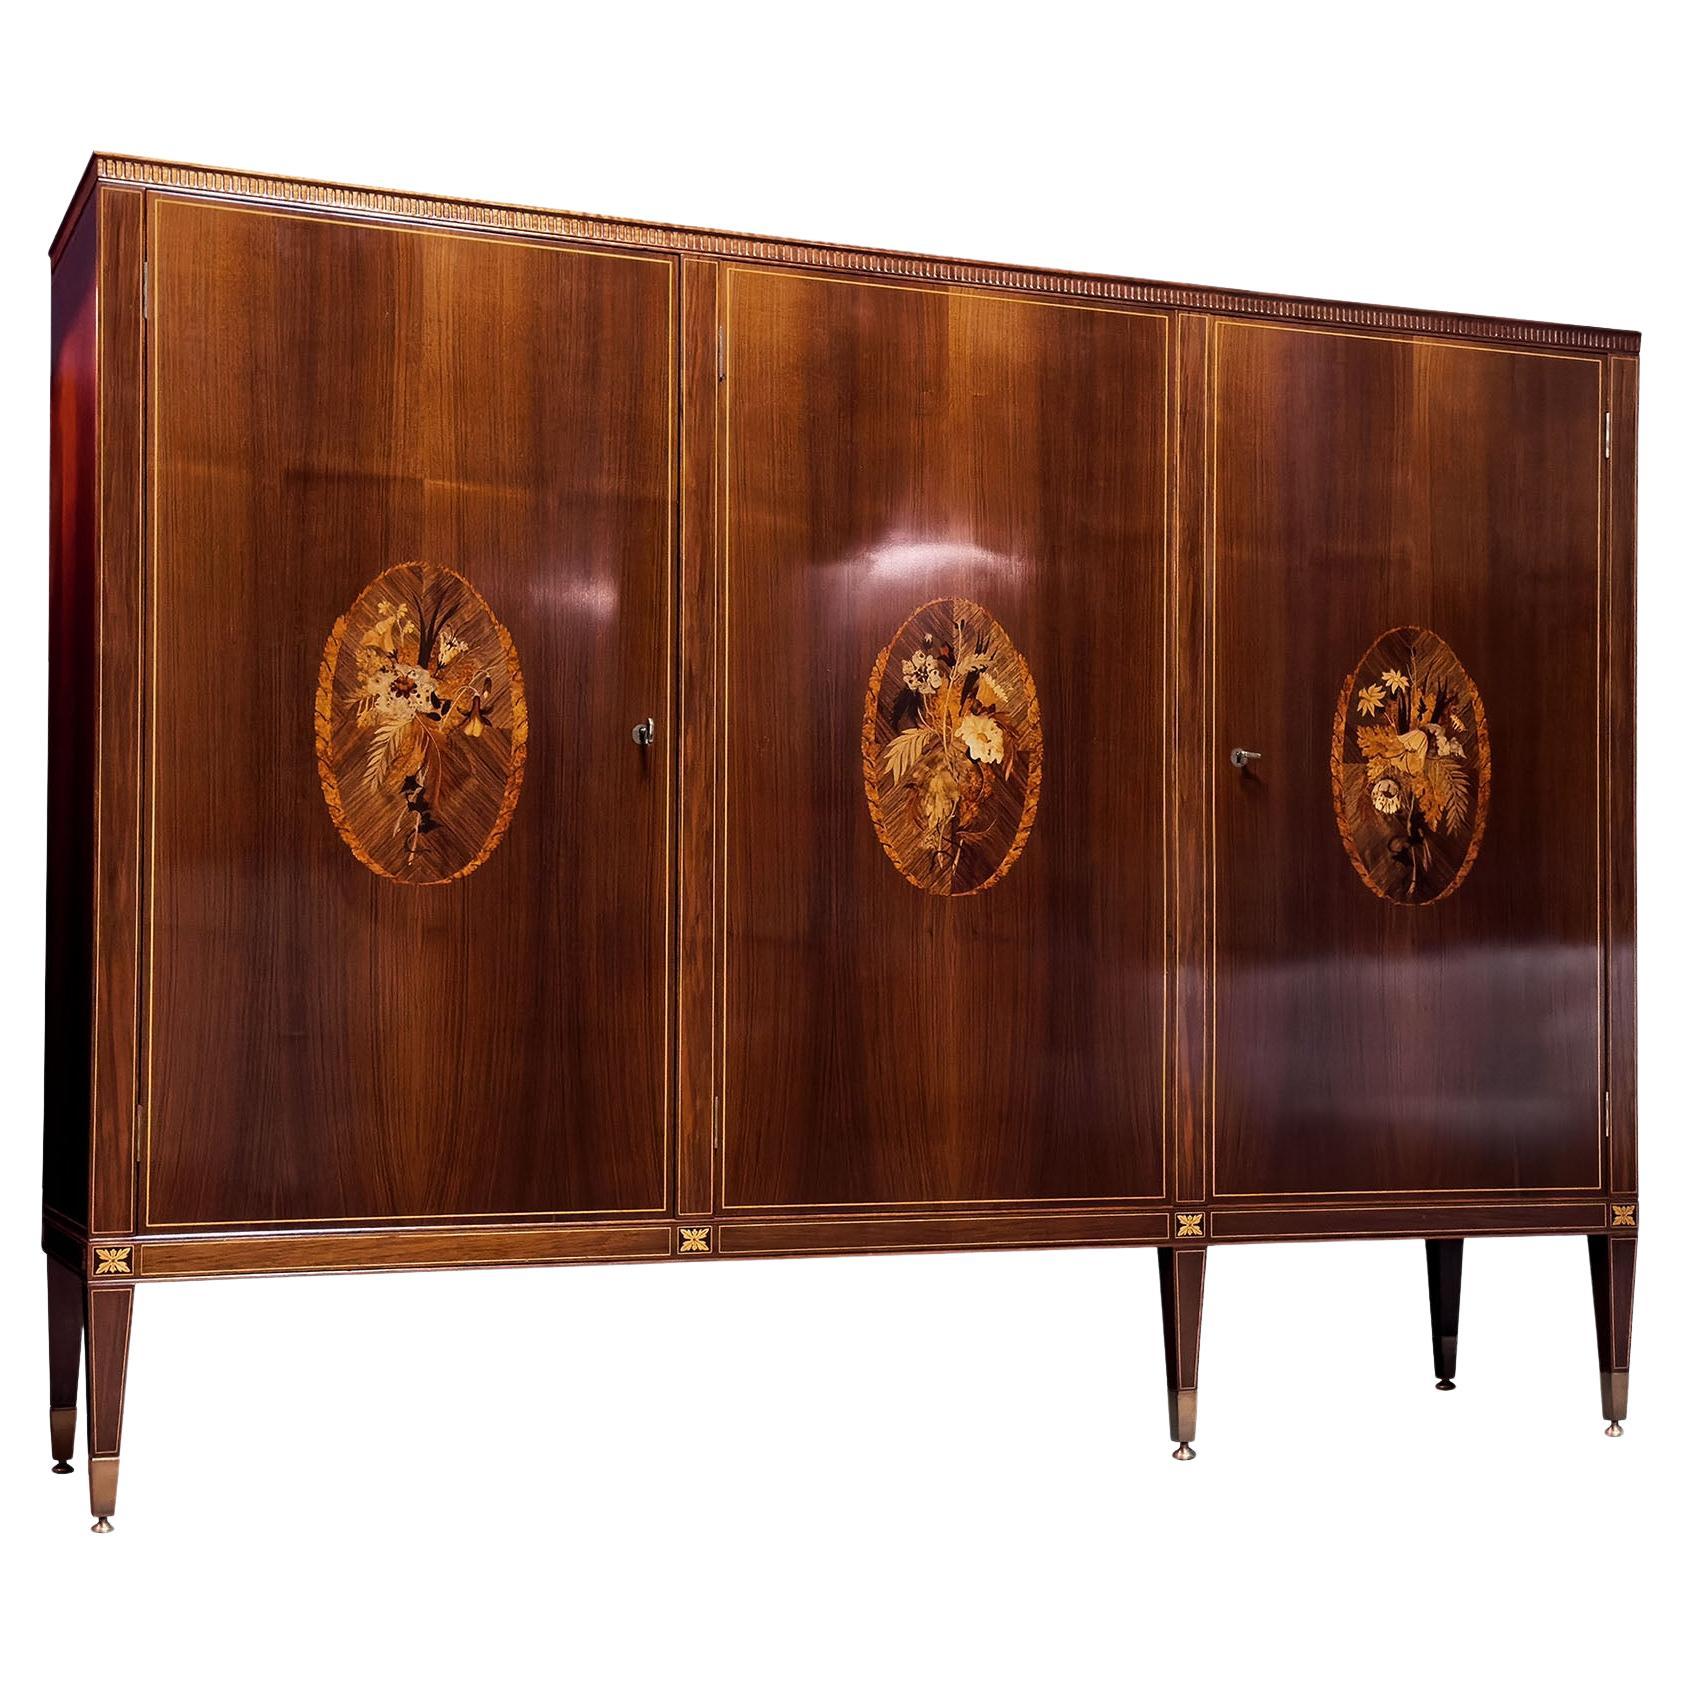 Italian Mid-Century Sideboard with Inlays by Anzani for Marelli & Colico, 1950s For Sale